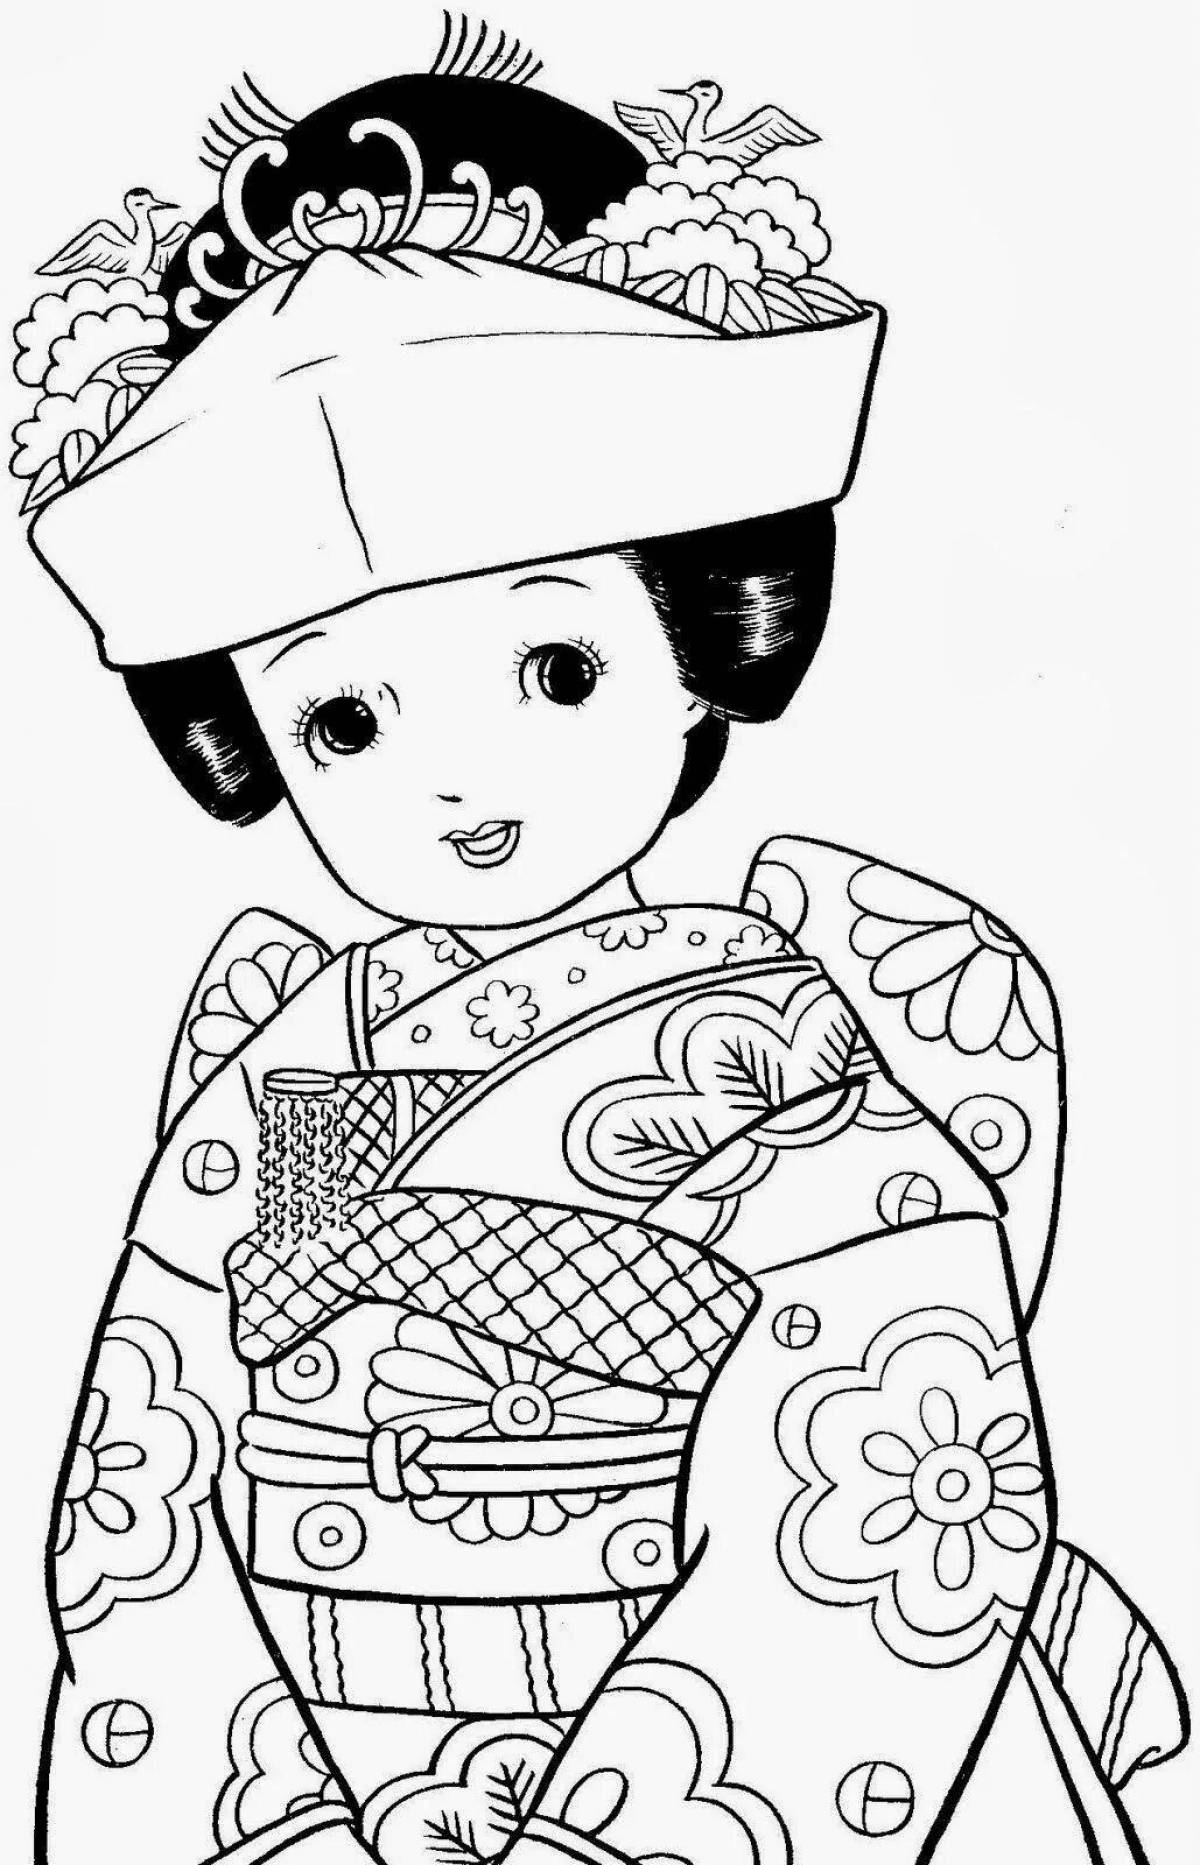 Exquisite Chinese girl coloring book